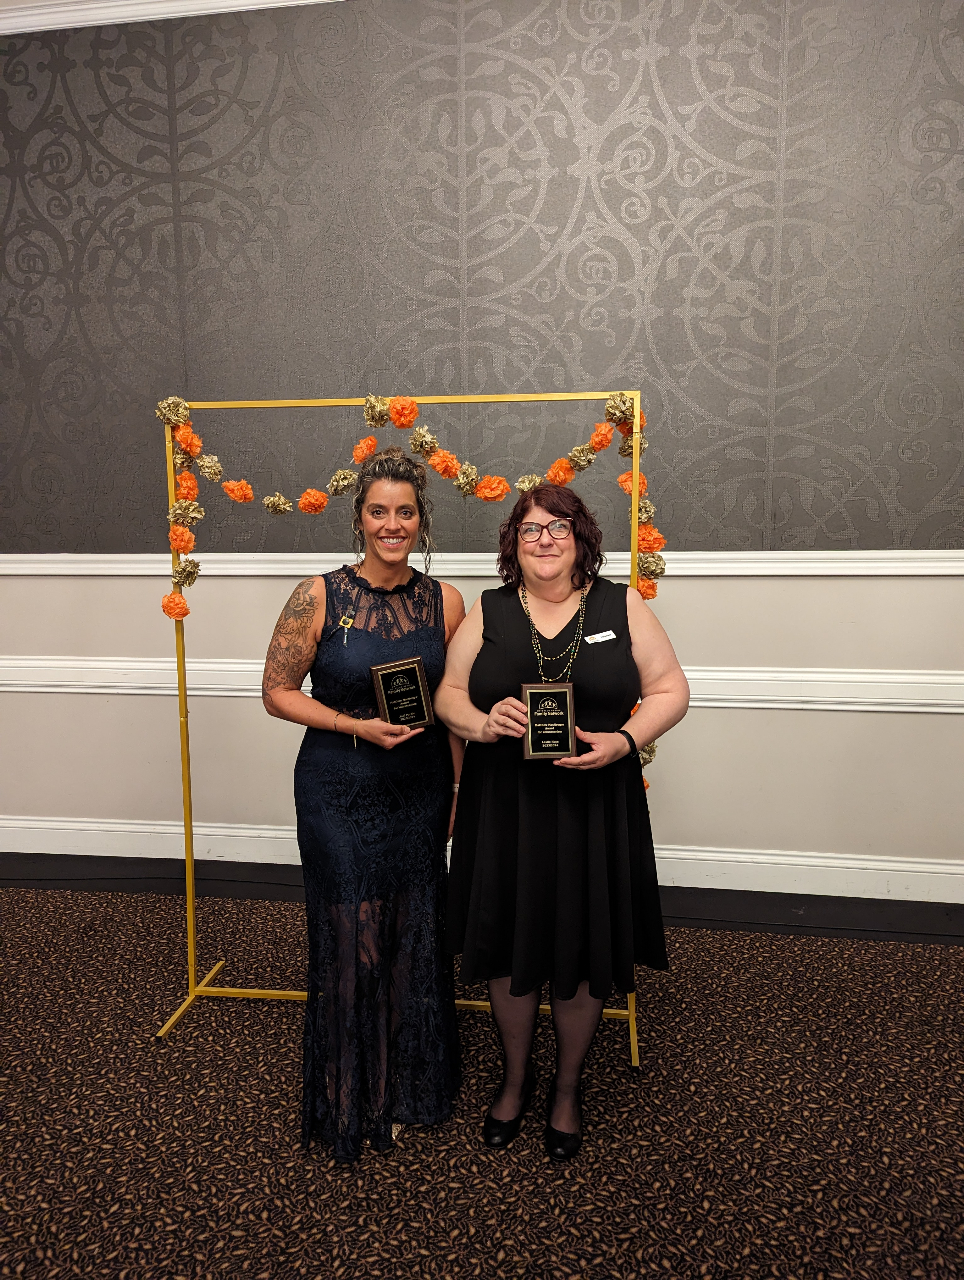 This is a photo of Jodi and Leslie, two esteemed individuals. Jodi, on the left, is dressed in a dignified dark grey lace gown, while Leslie, standing next to her, wears a black short-sleeved dress. They are positioned in front of a majestic gold arch adorned with vibrant orange and gold paper flowers. Each holds a plaque, The Matthew MacGregor Award, symbolizing their outstanding achievement.